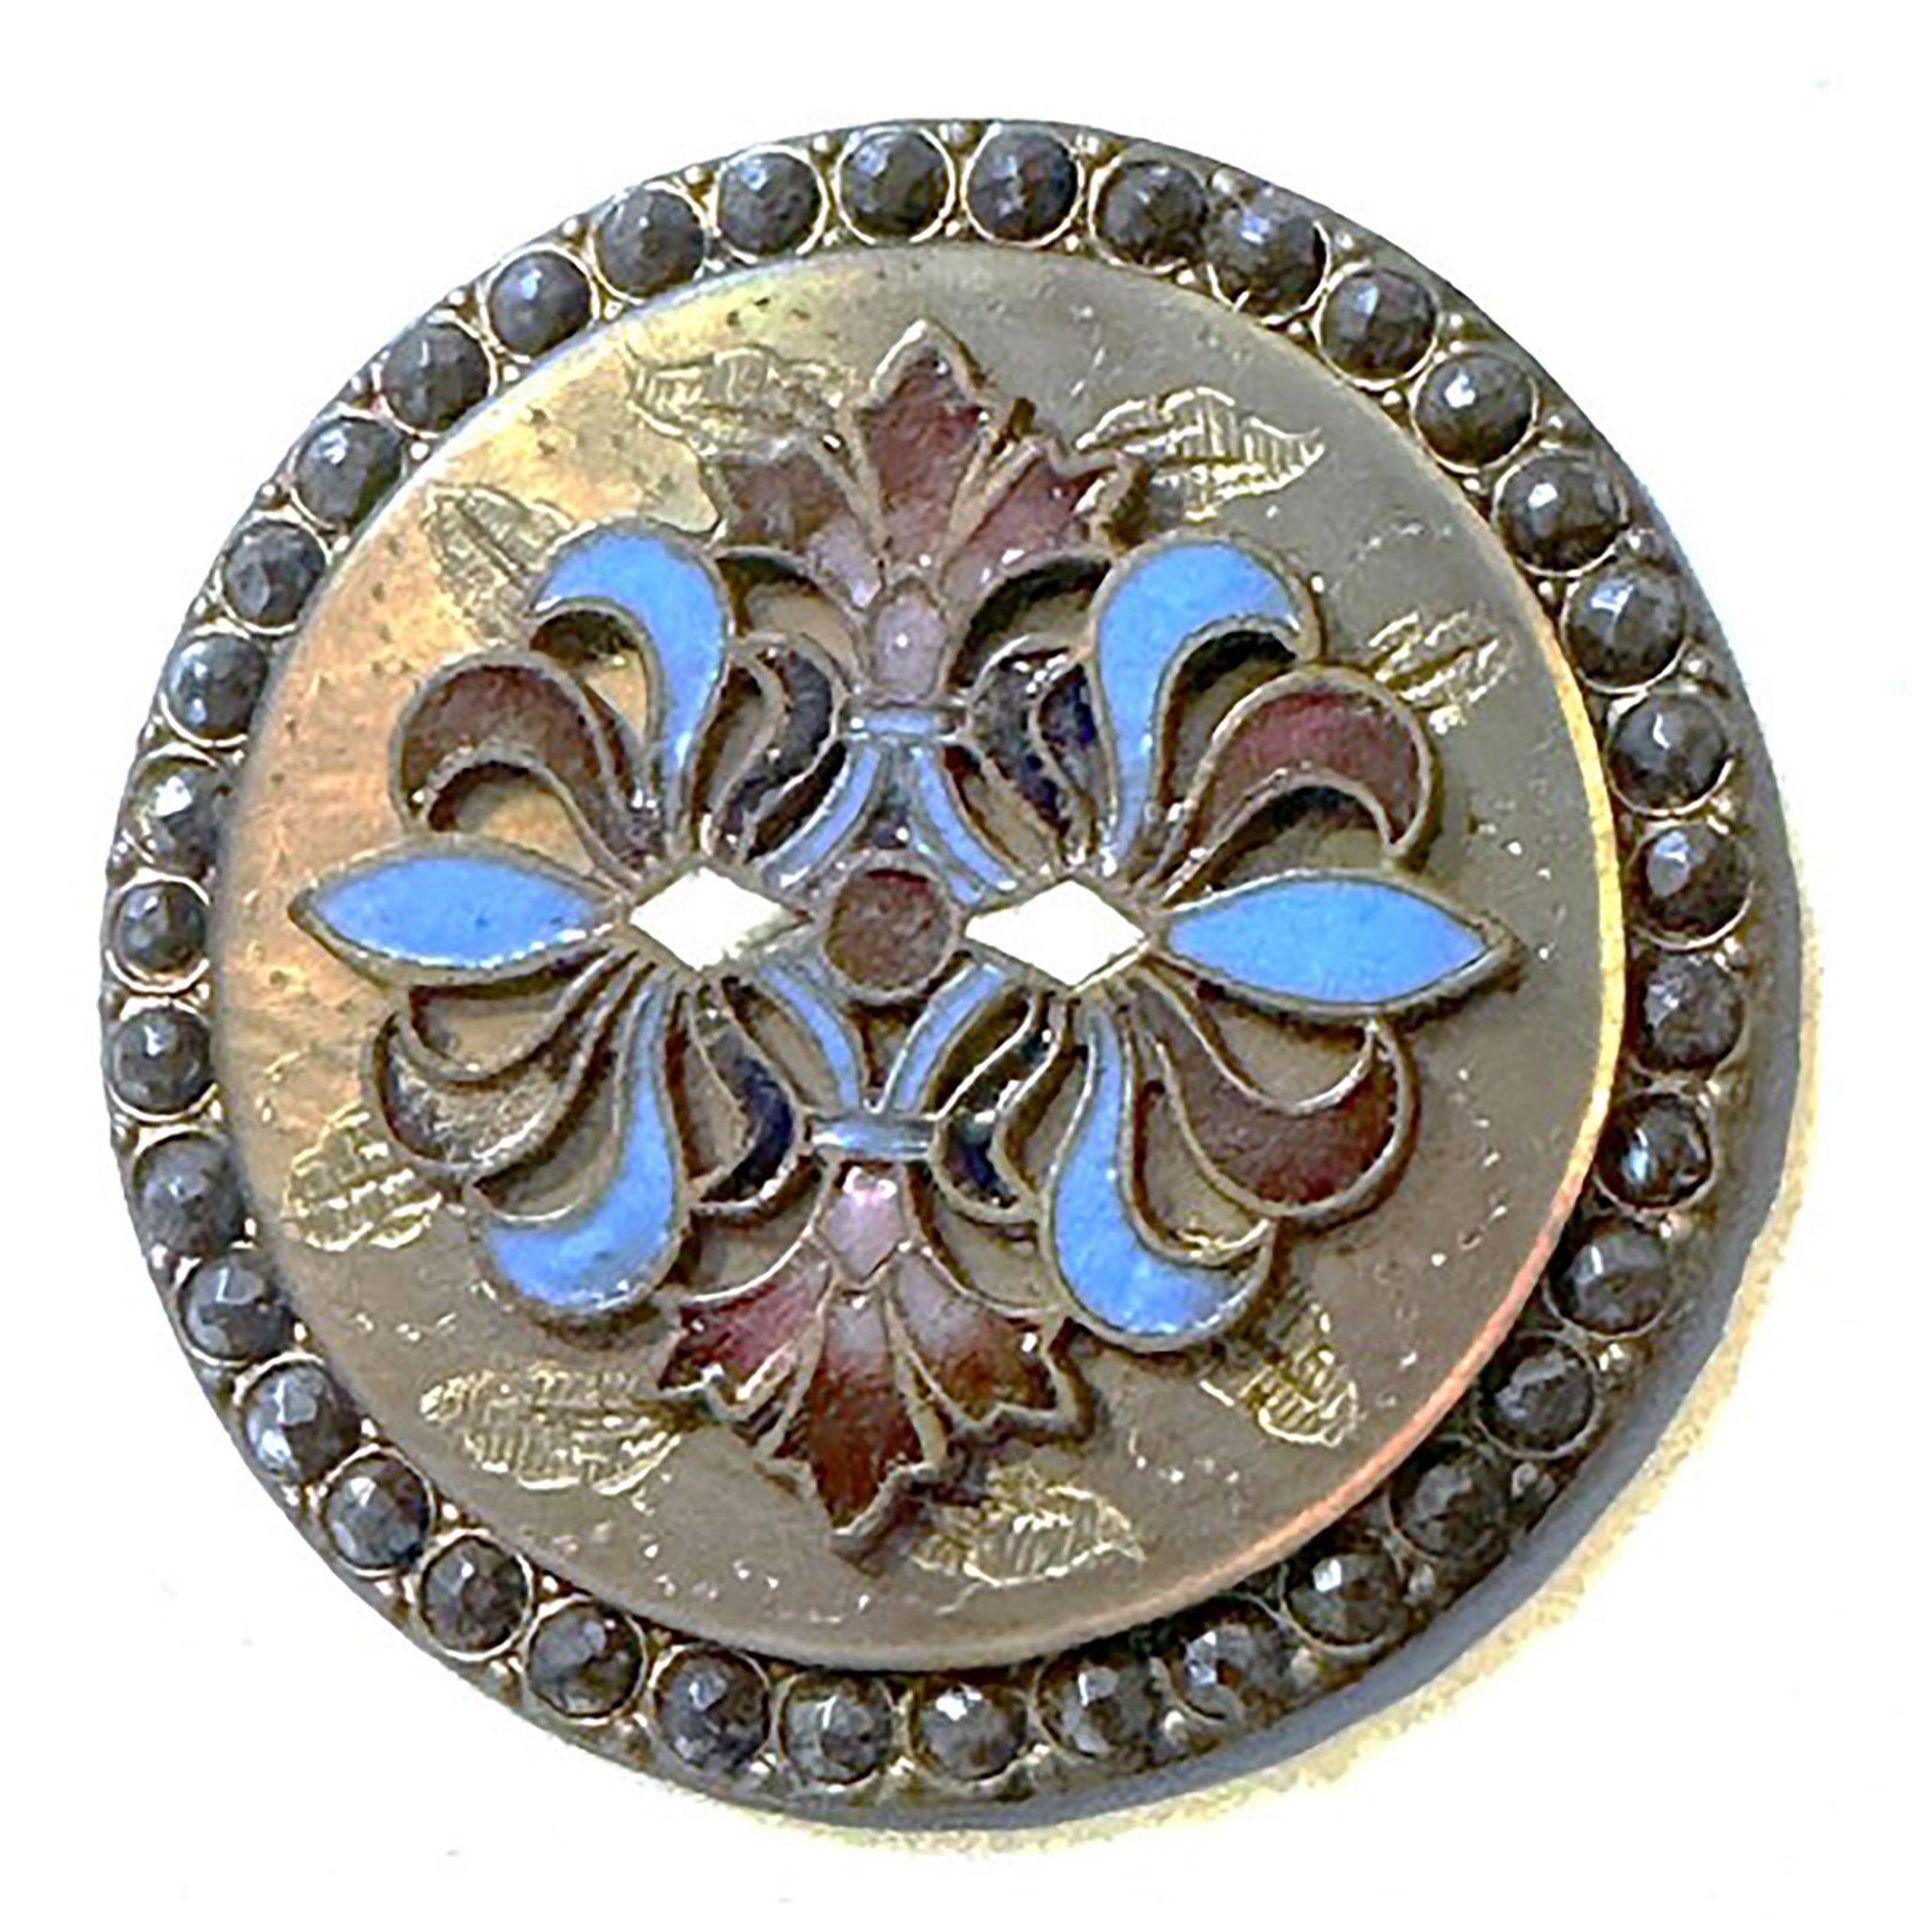 A division one enamel and pearl button